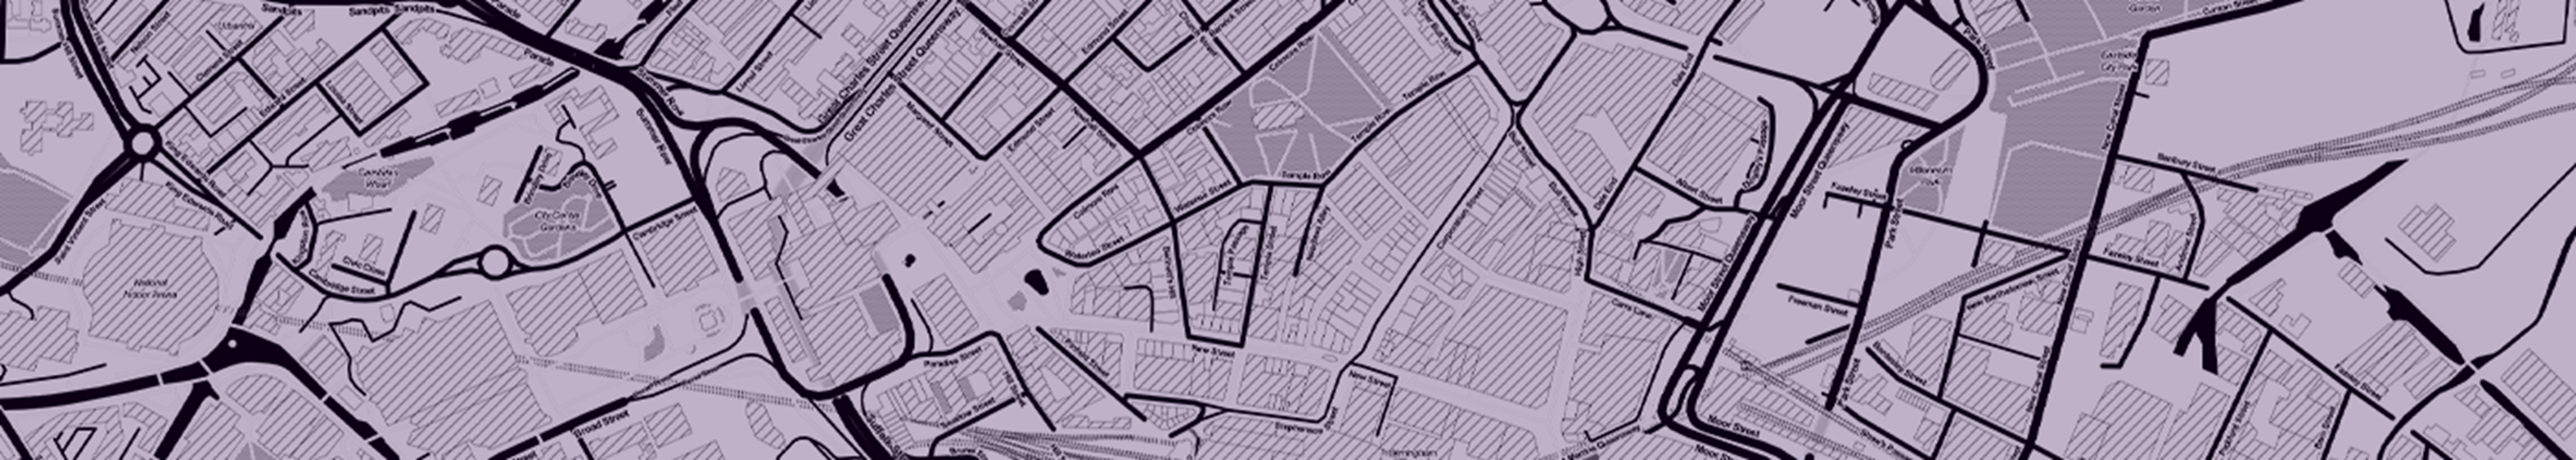 Image of a black and white map with a purple filter